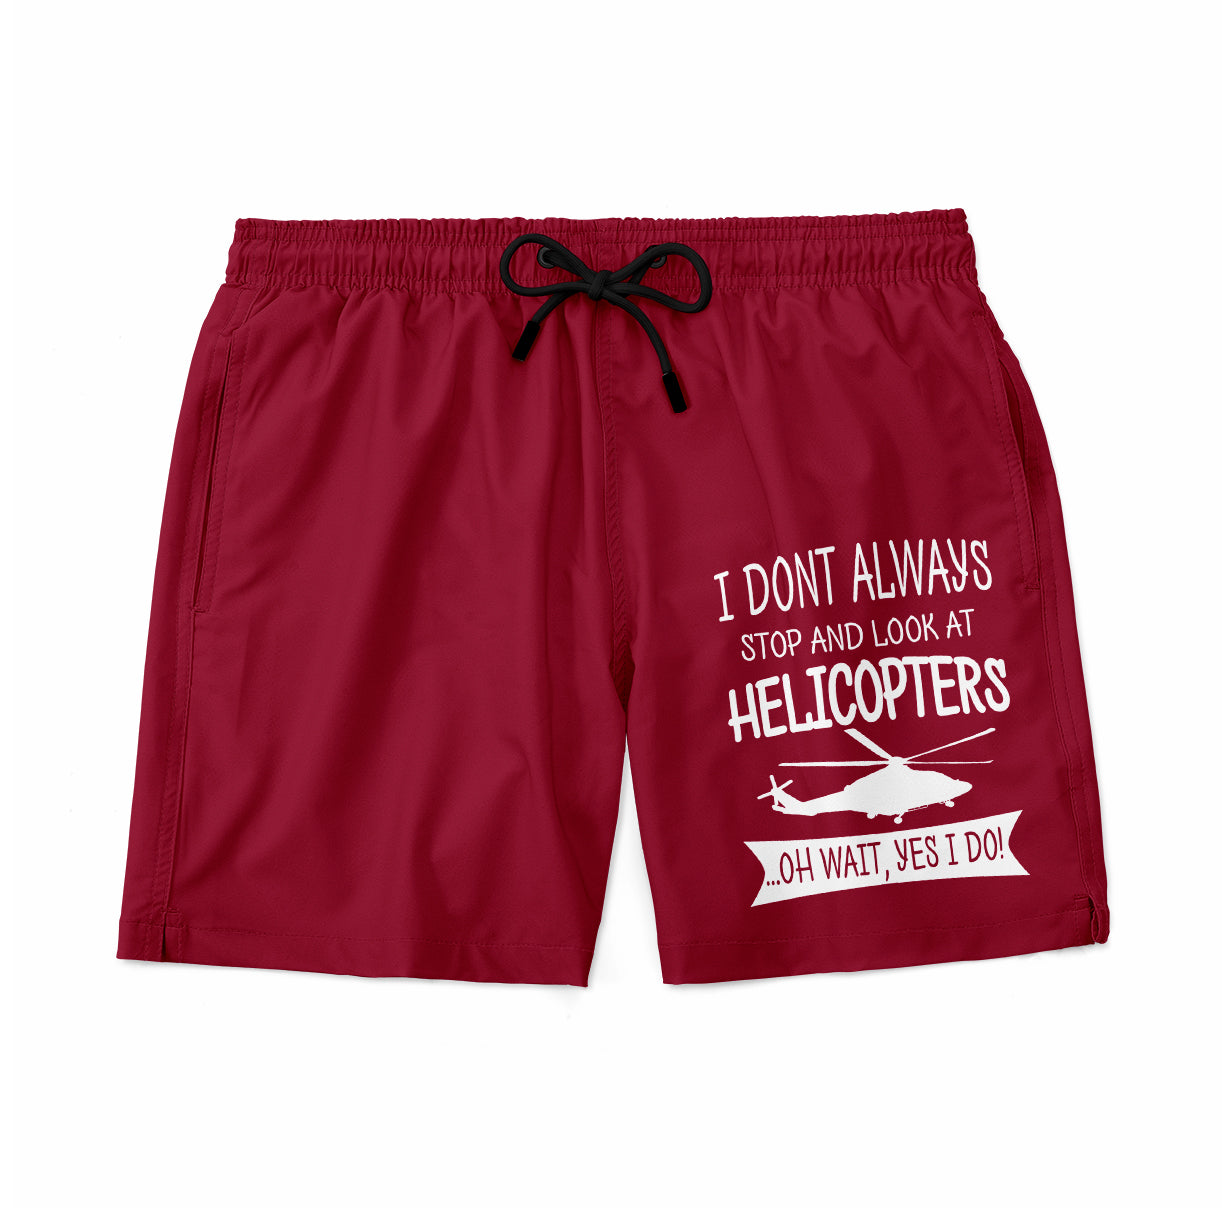 I Don't Always Stop and Look at Helicopters Designed Swim Trunks & Shorts